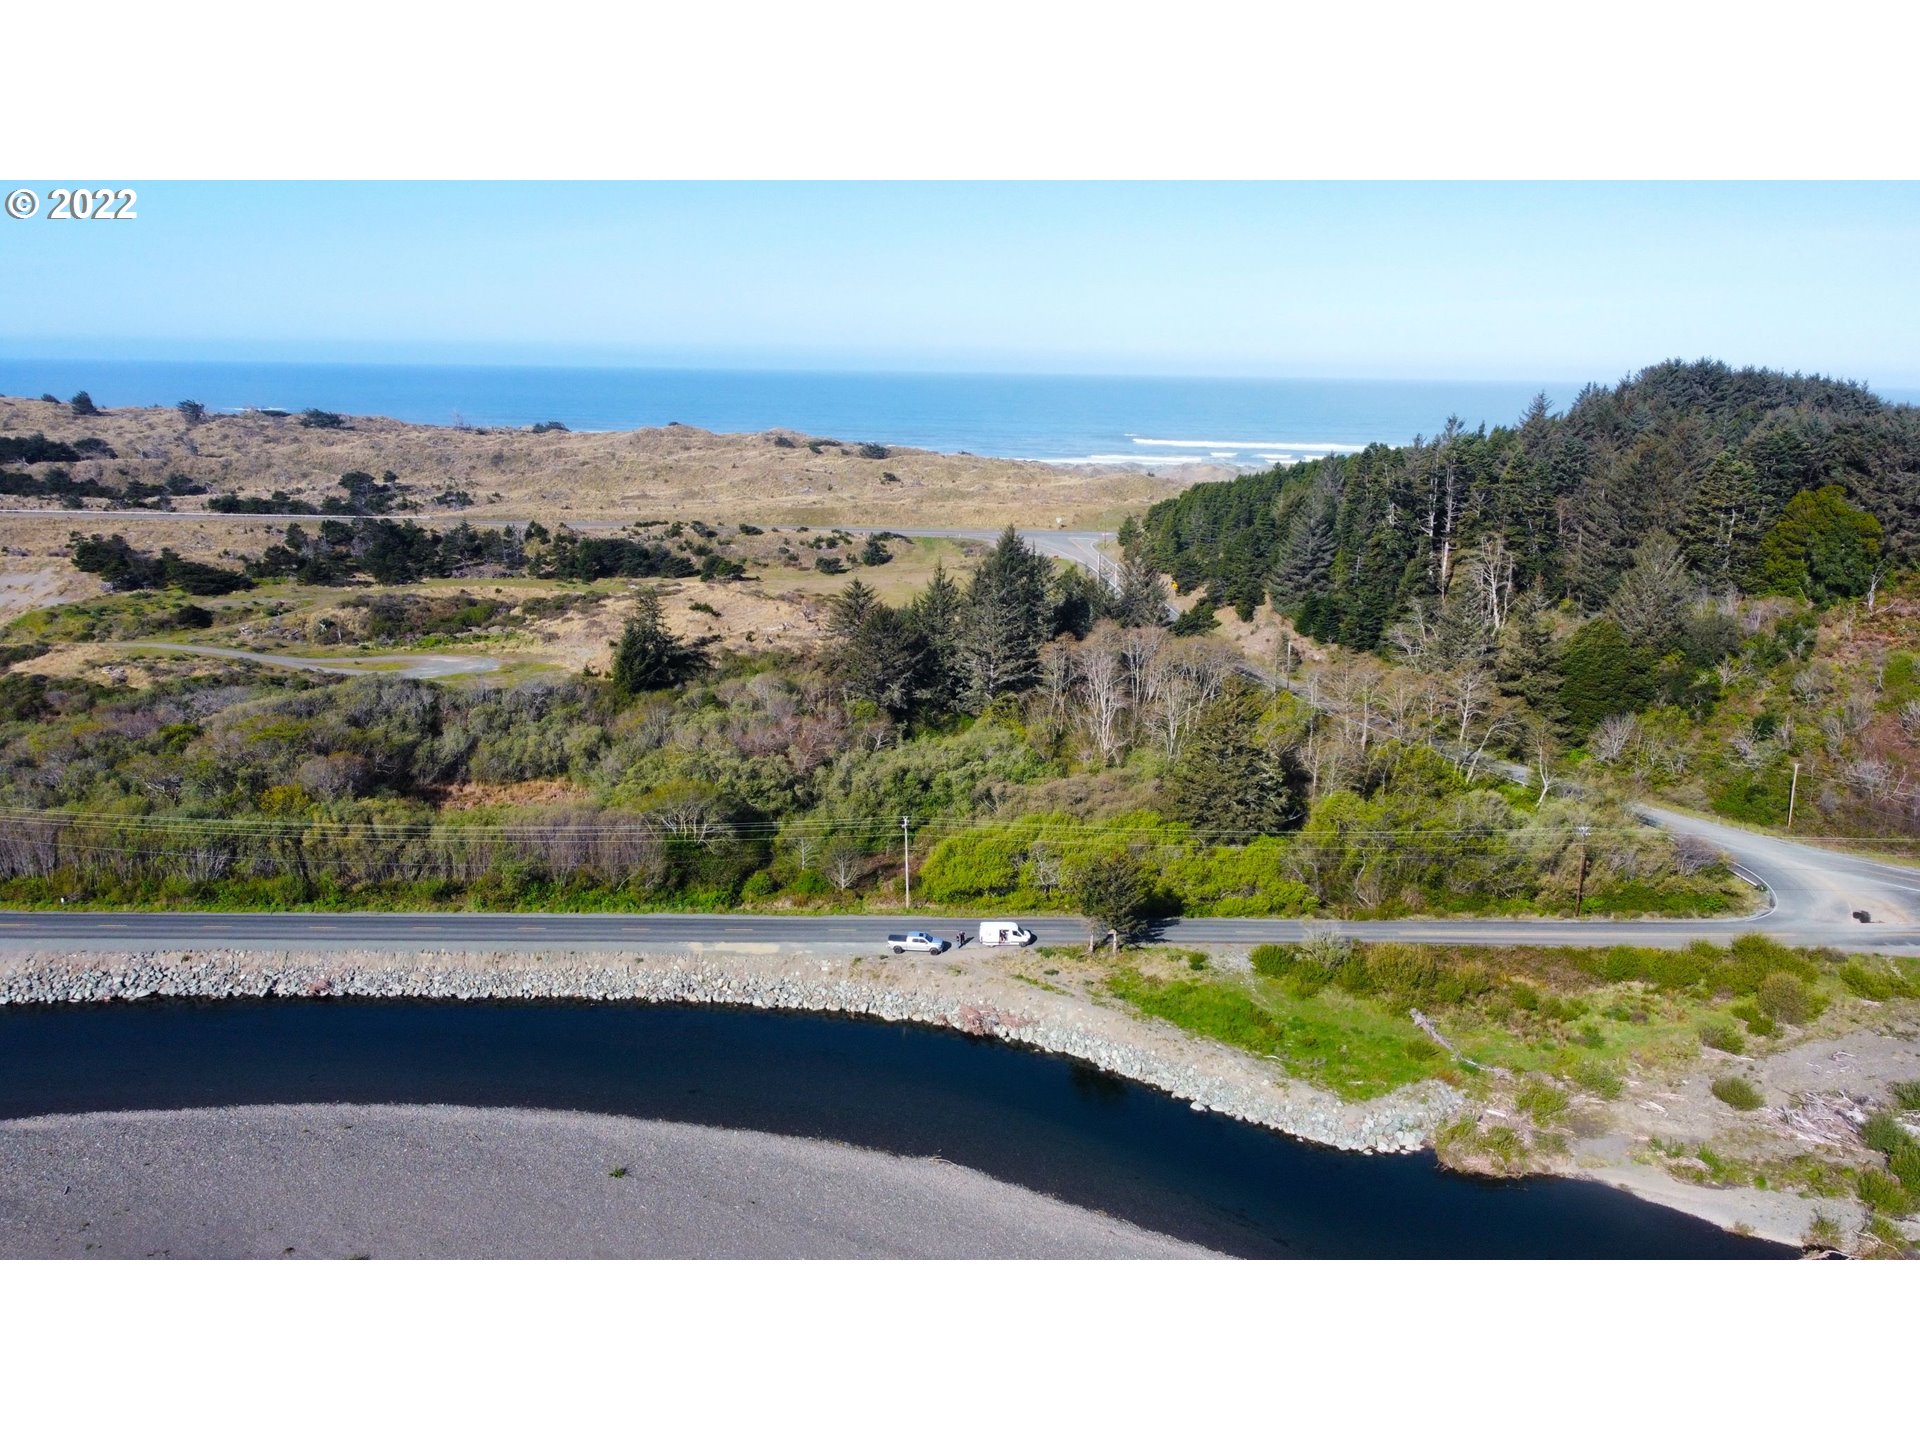  CARPENTERVILLE RD Gold Beach, Brookings Home Listings - Pacific Coastal Real Estate